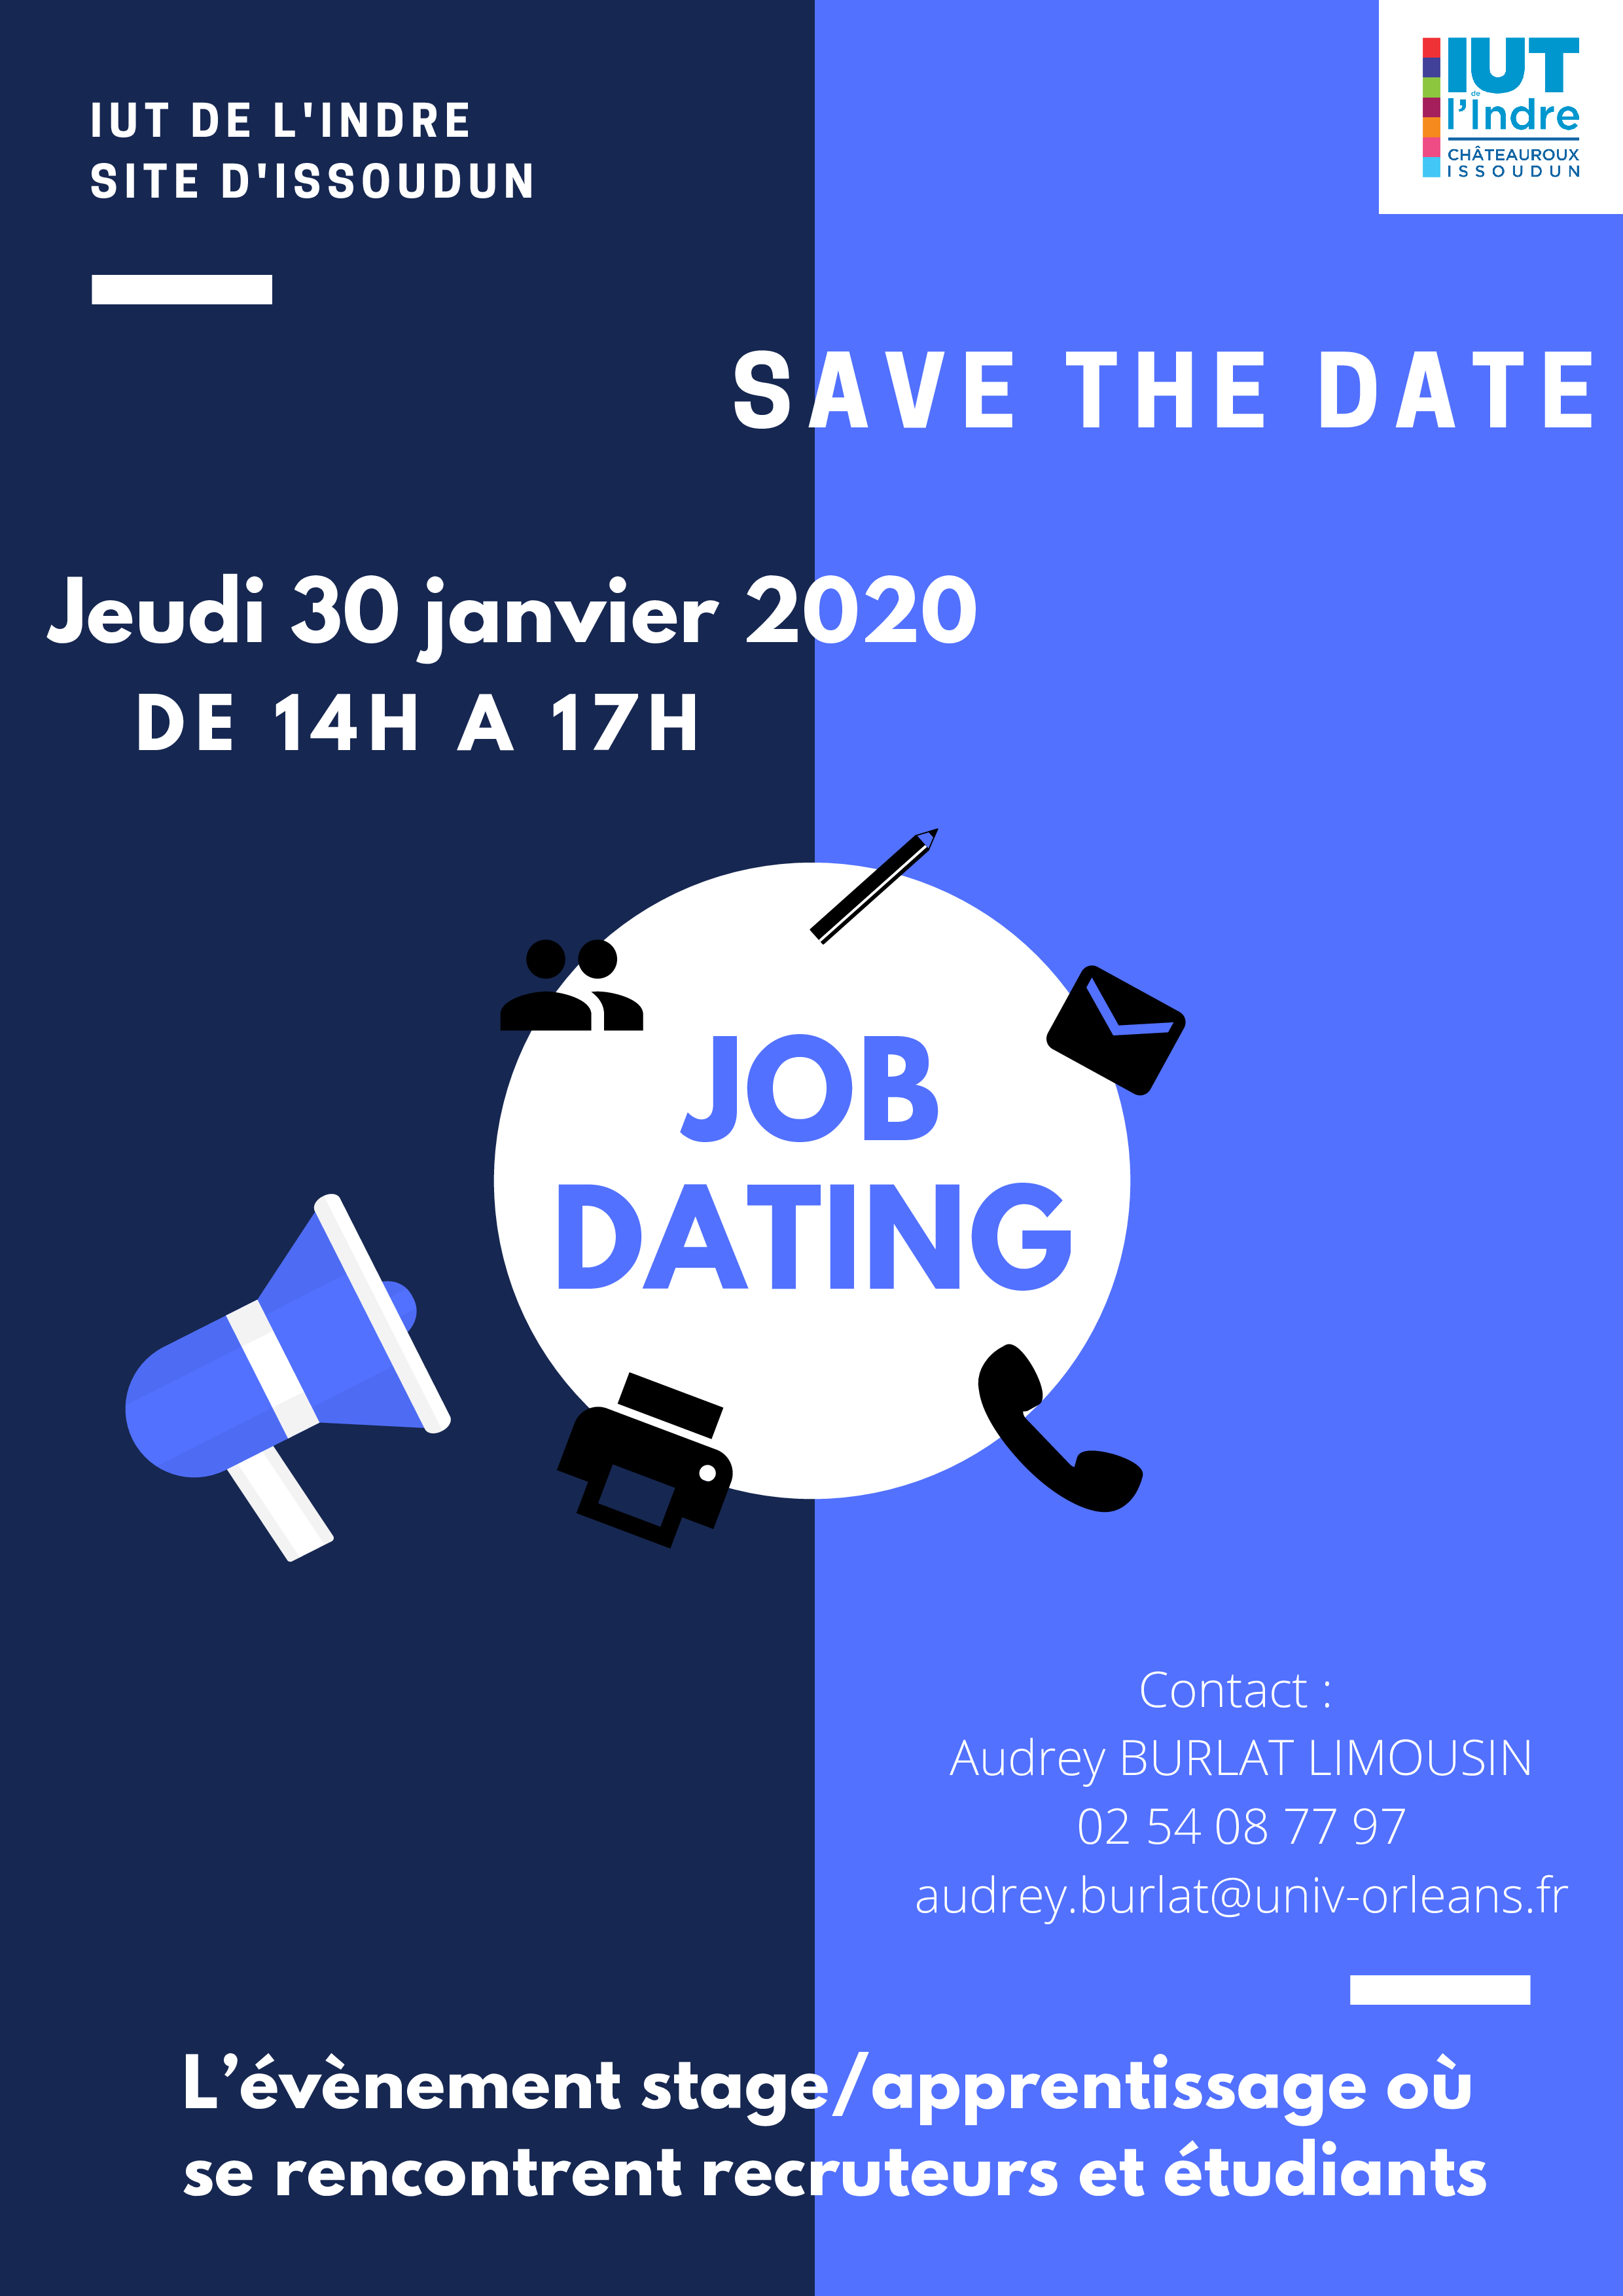 Job Dating - IUT Indre